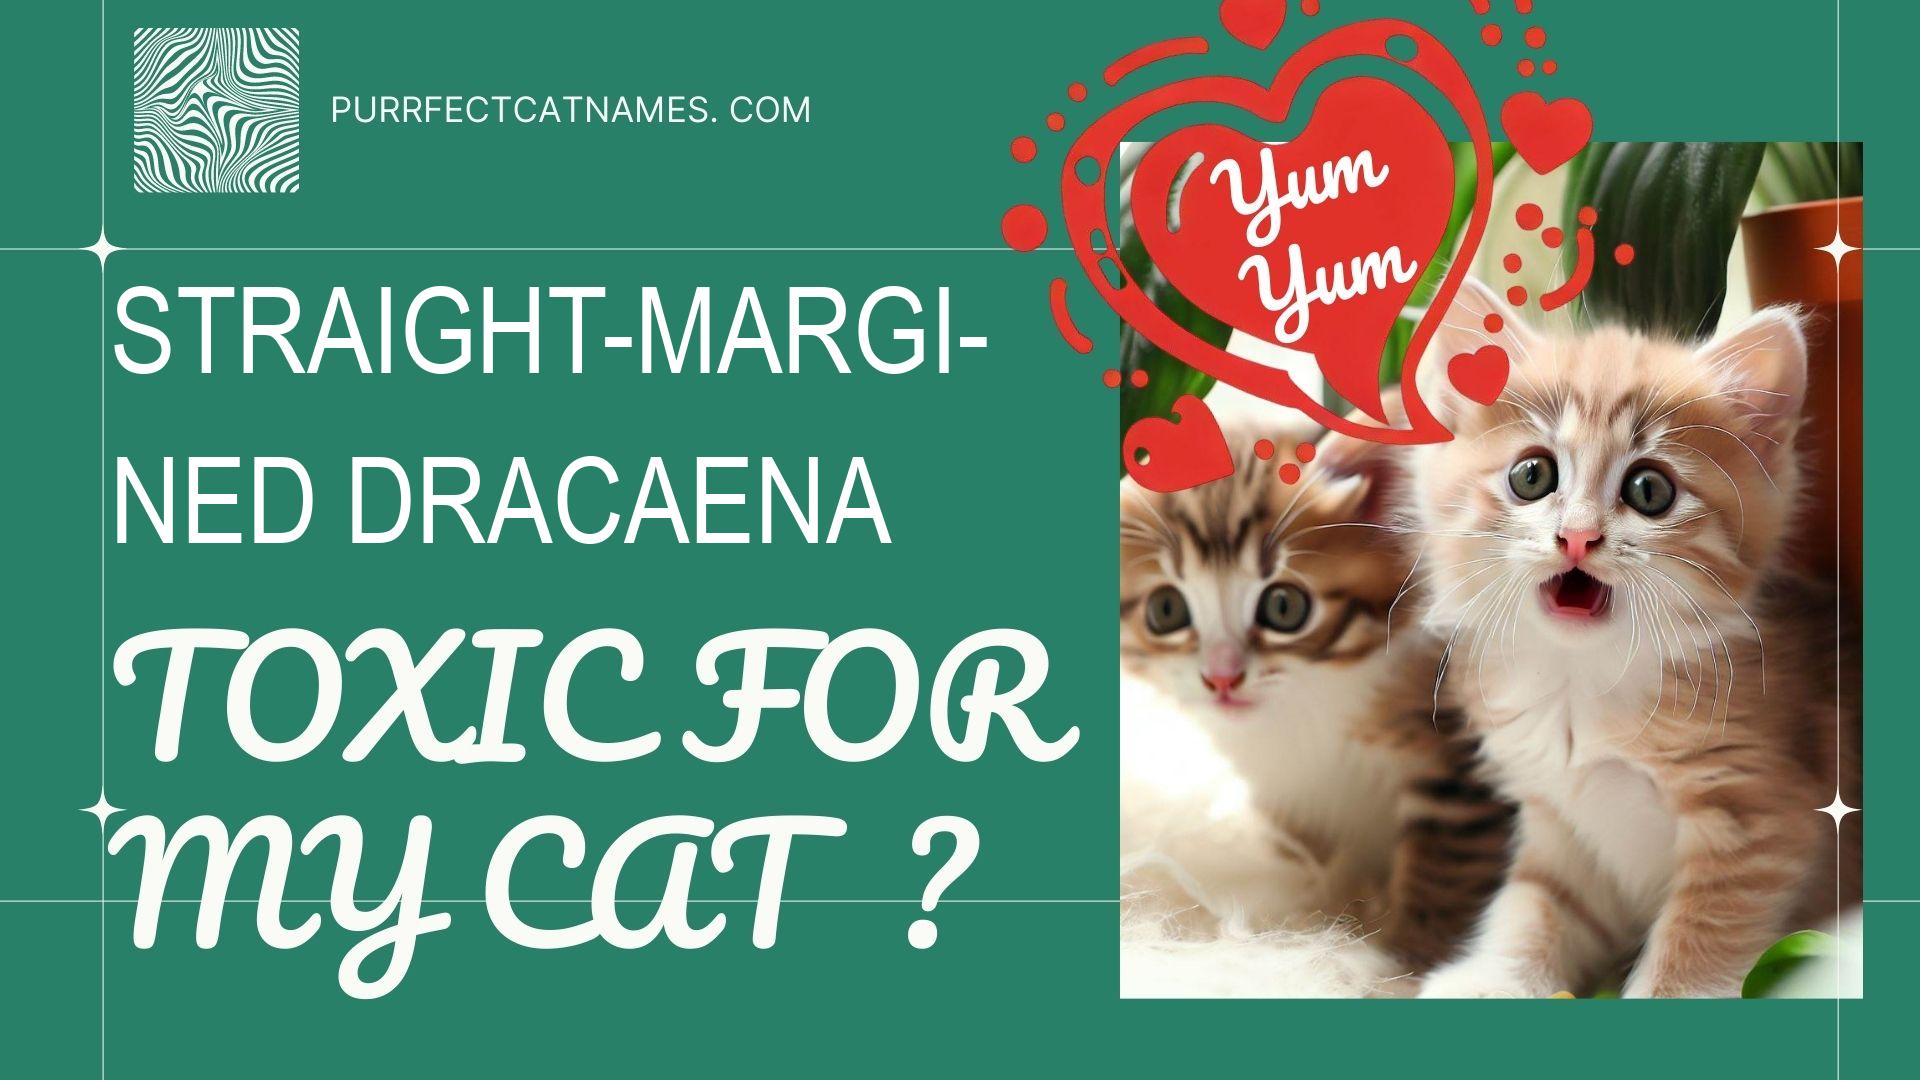 IsStraight-Margined Dracaena plant toxic for your cat